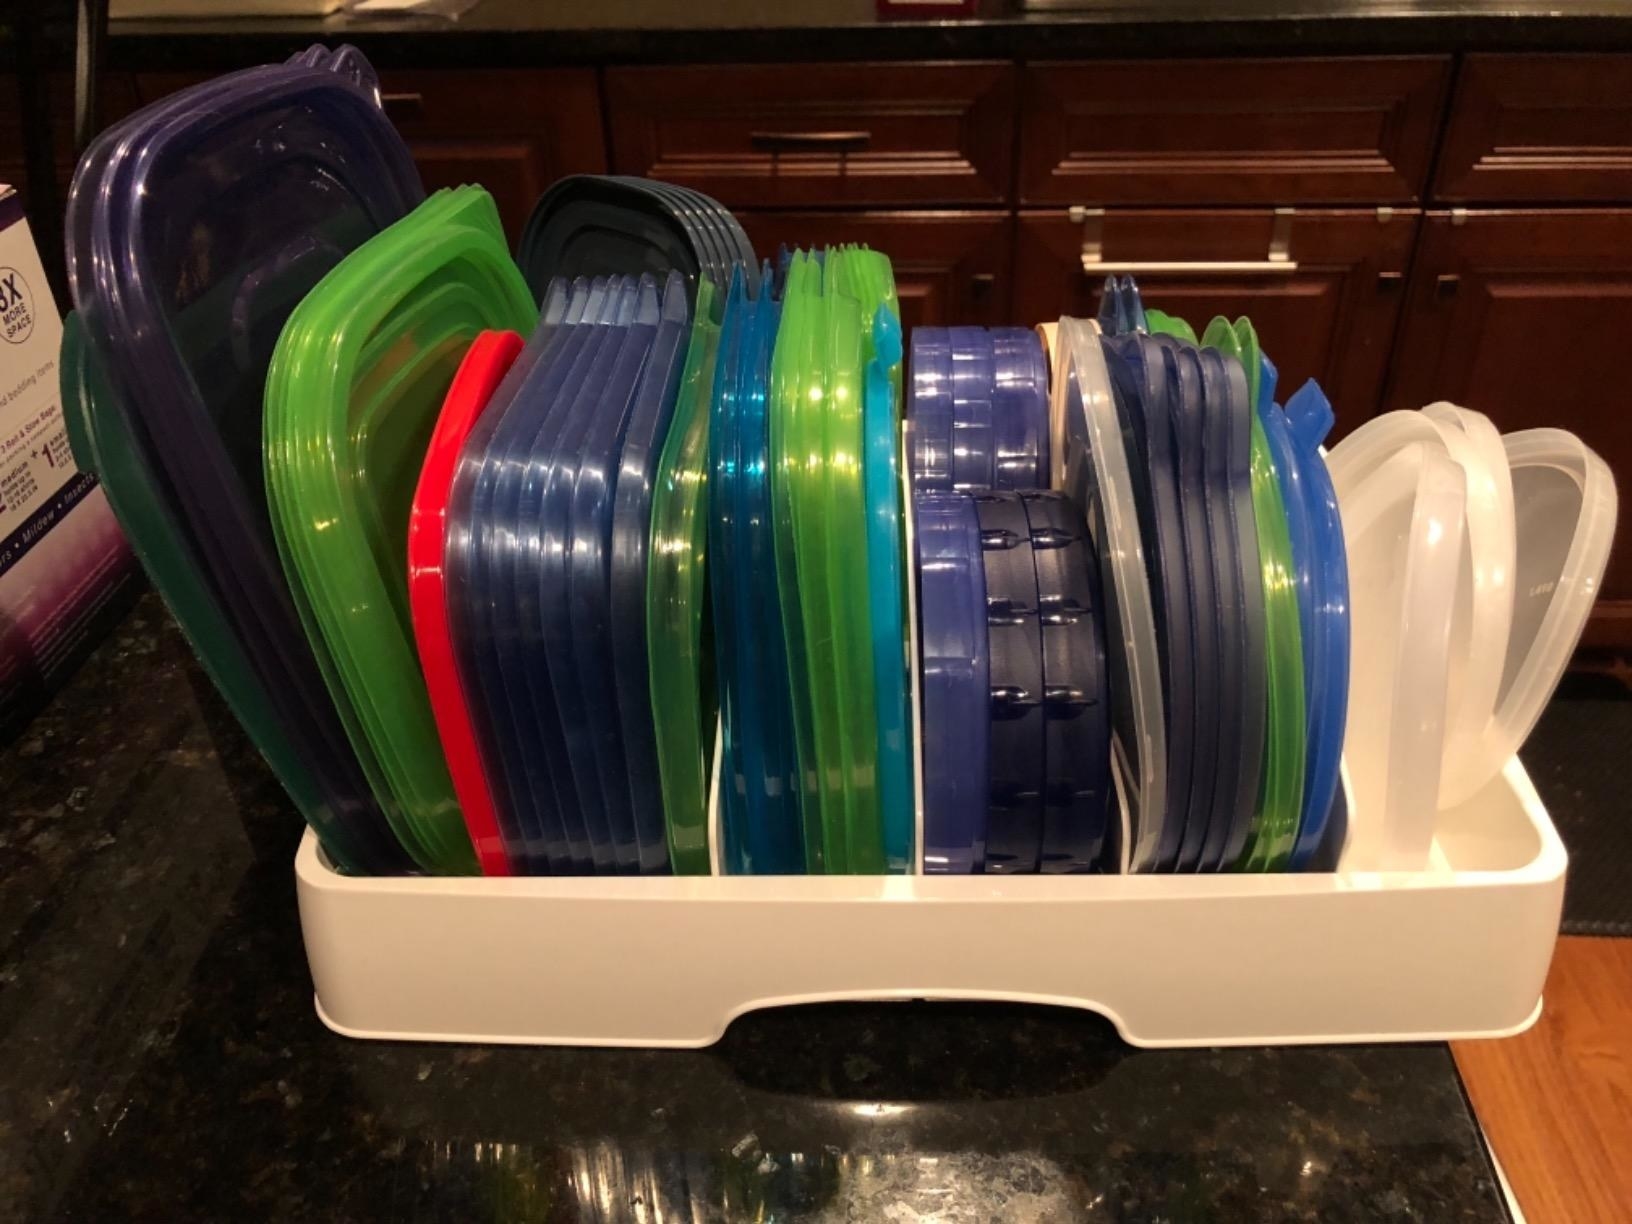 Reviewer shows their organized container lids